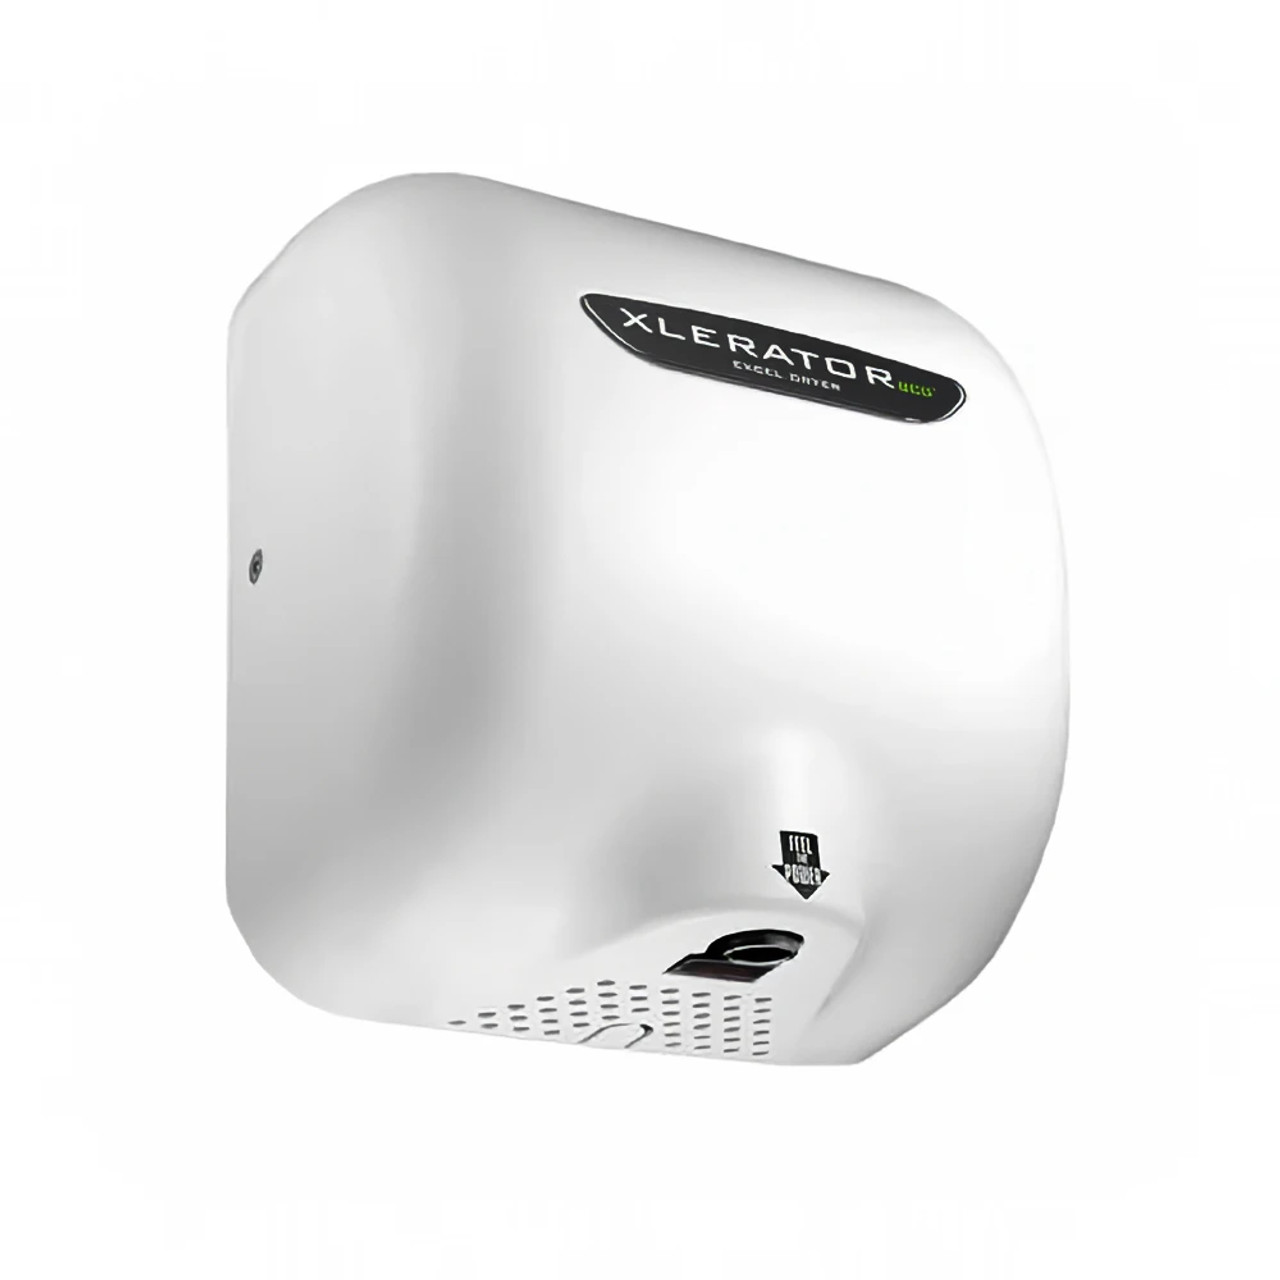 Excel Dryer Automatic Hand Dryer - 10 Second Dry Time, White, 110-120V - Chicken Pieces